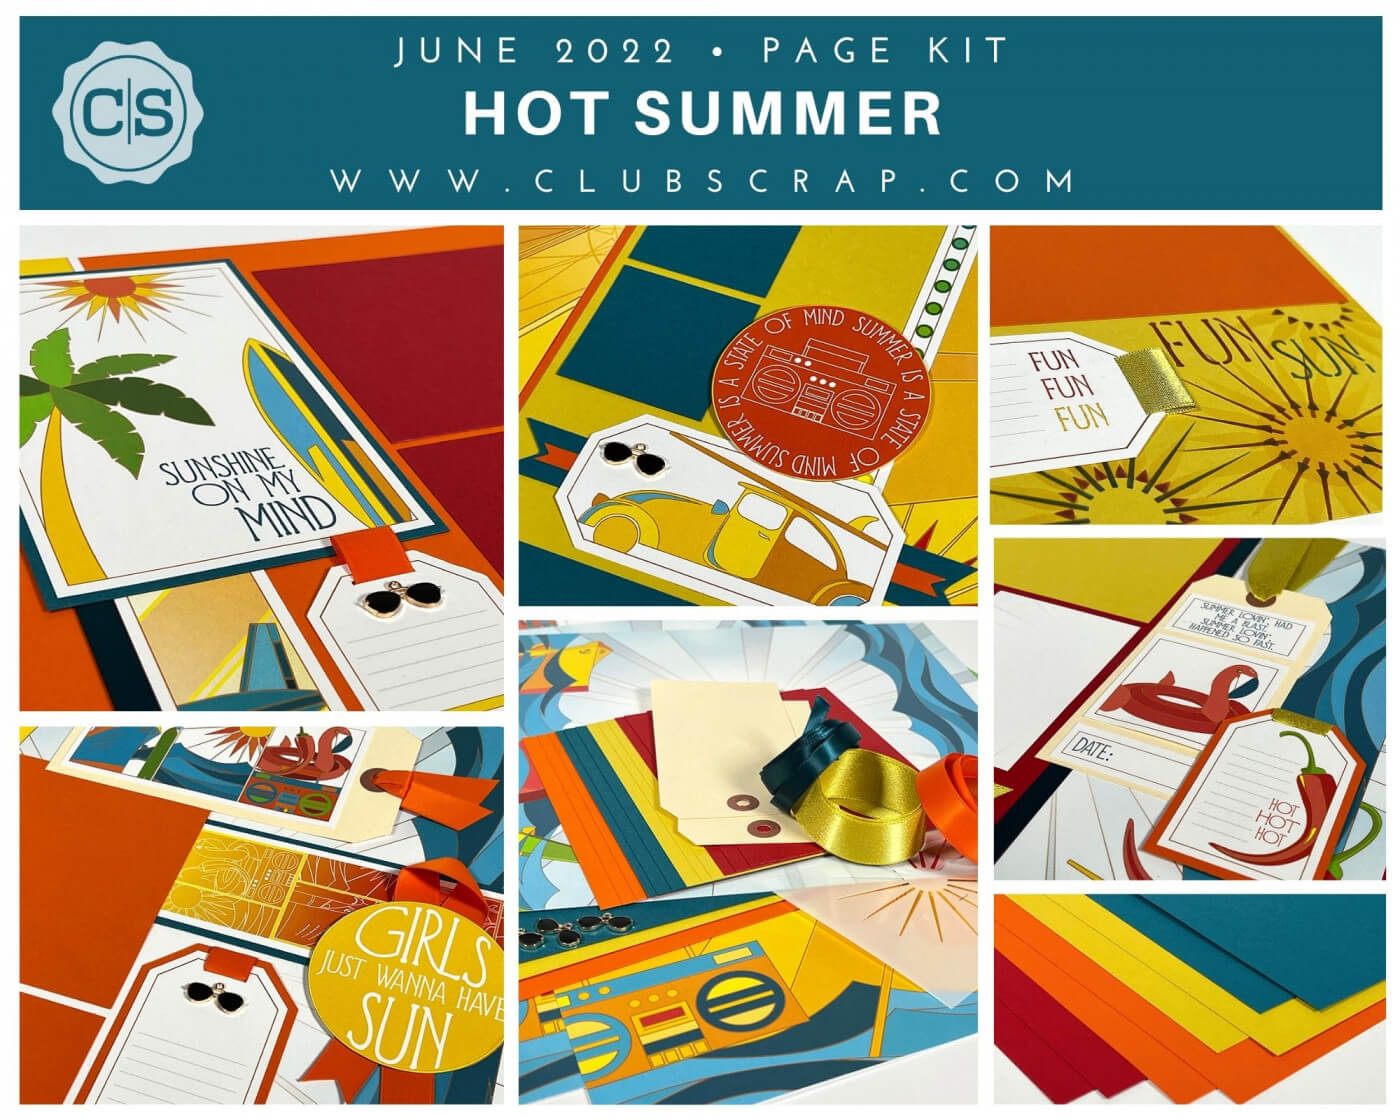 Hot Summer Spoiler - Page Kit by Club Scrap #clubscrap